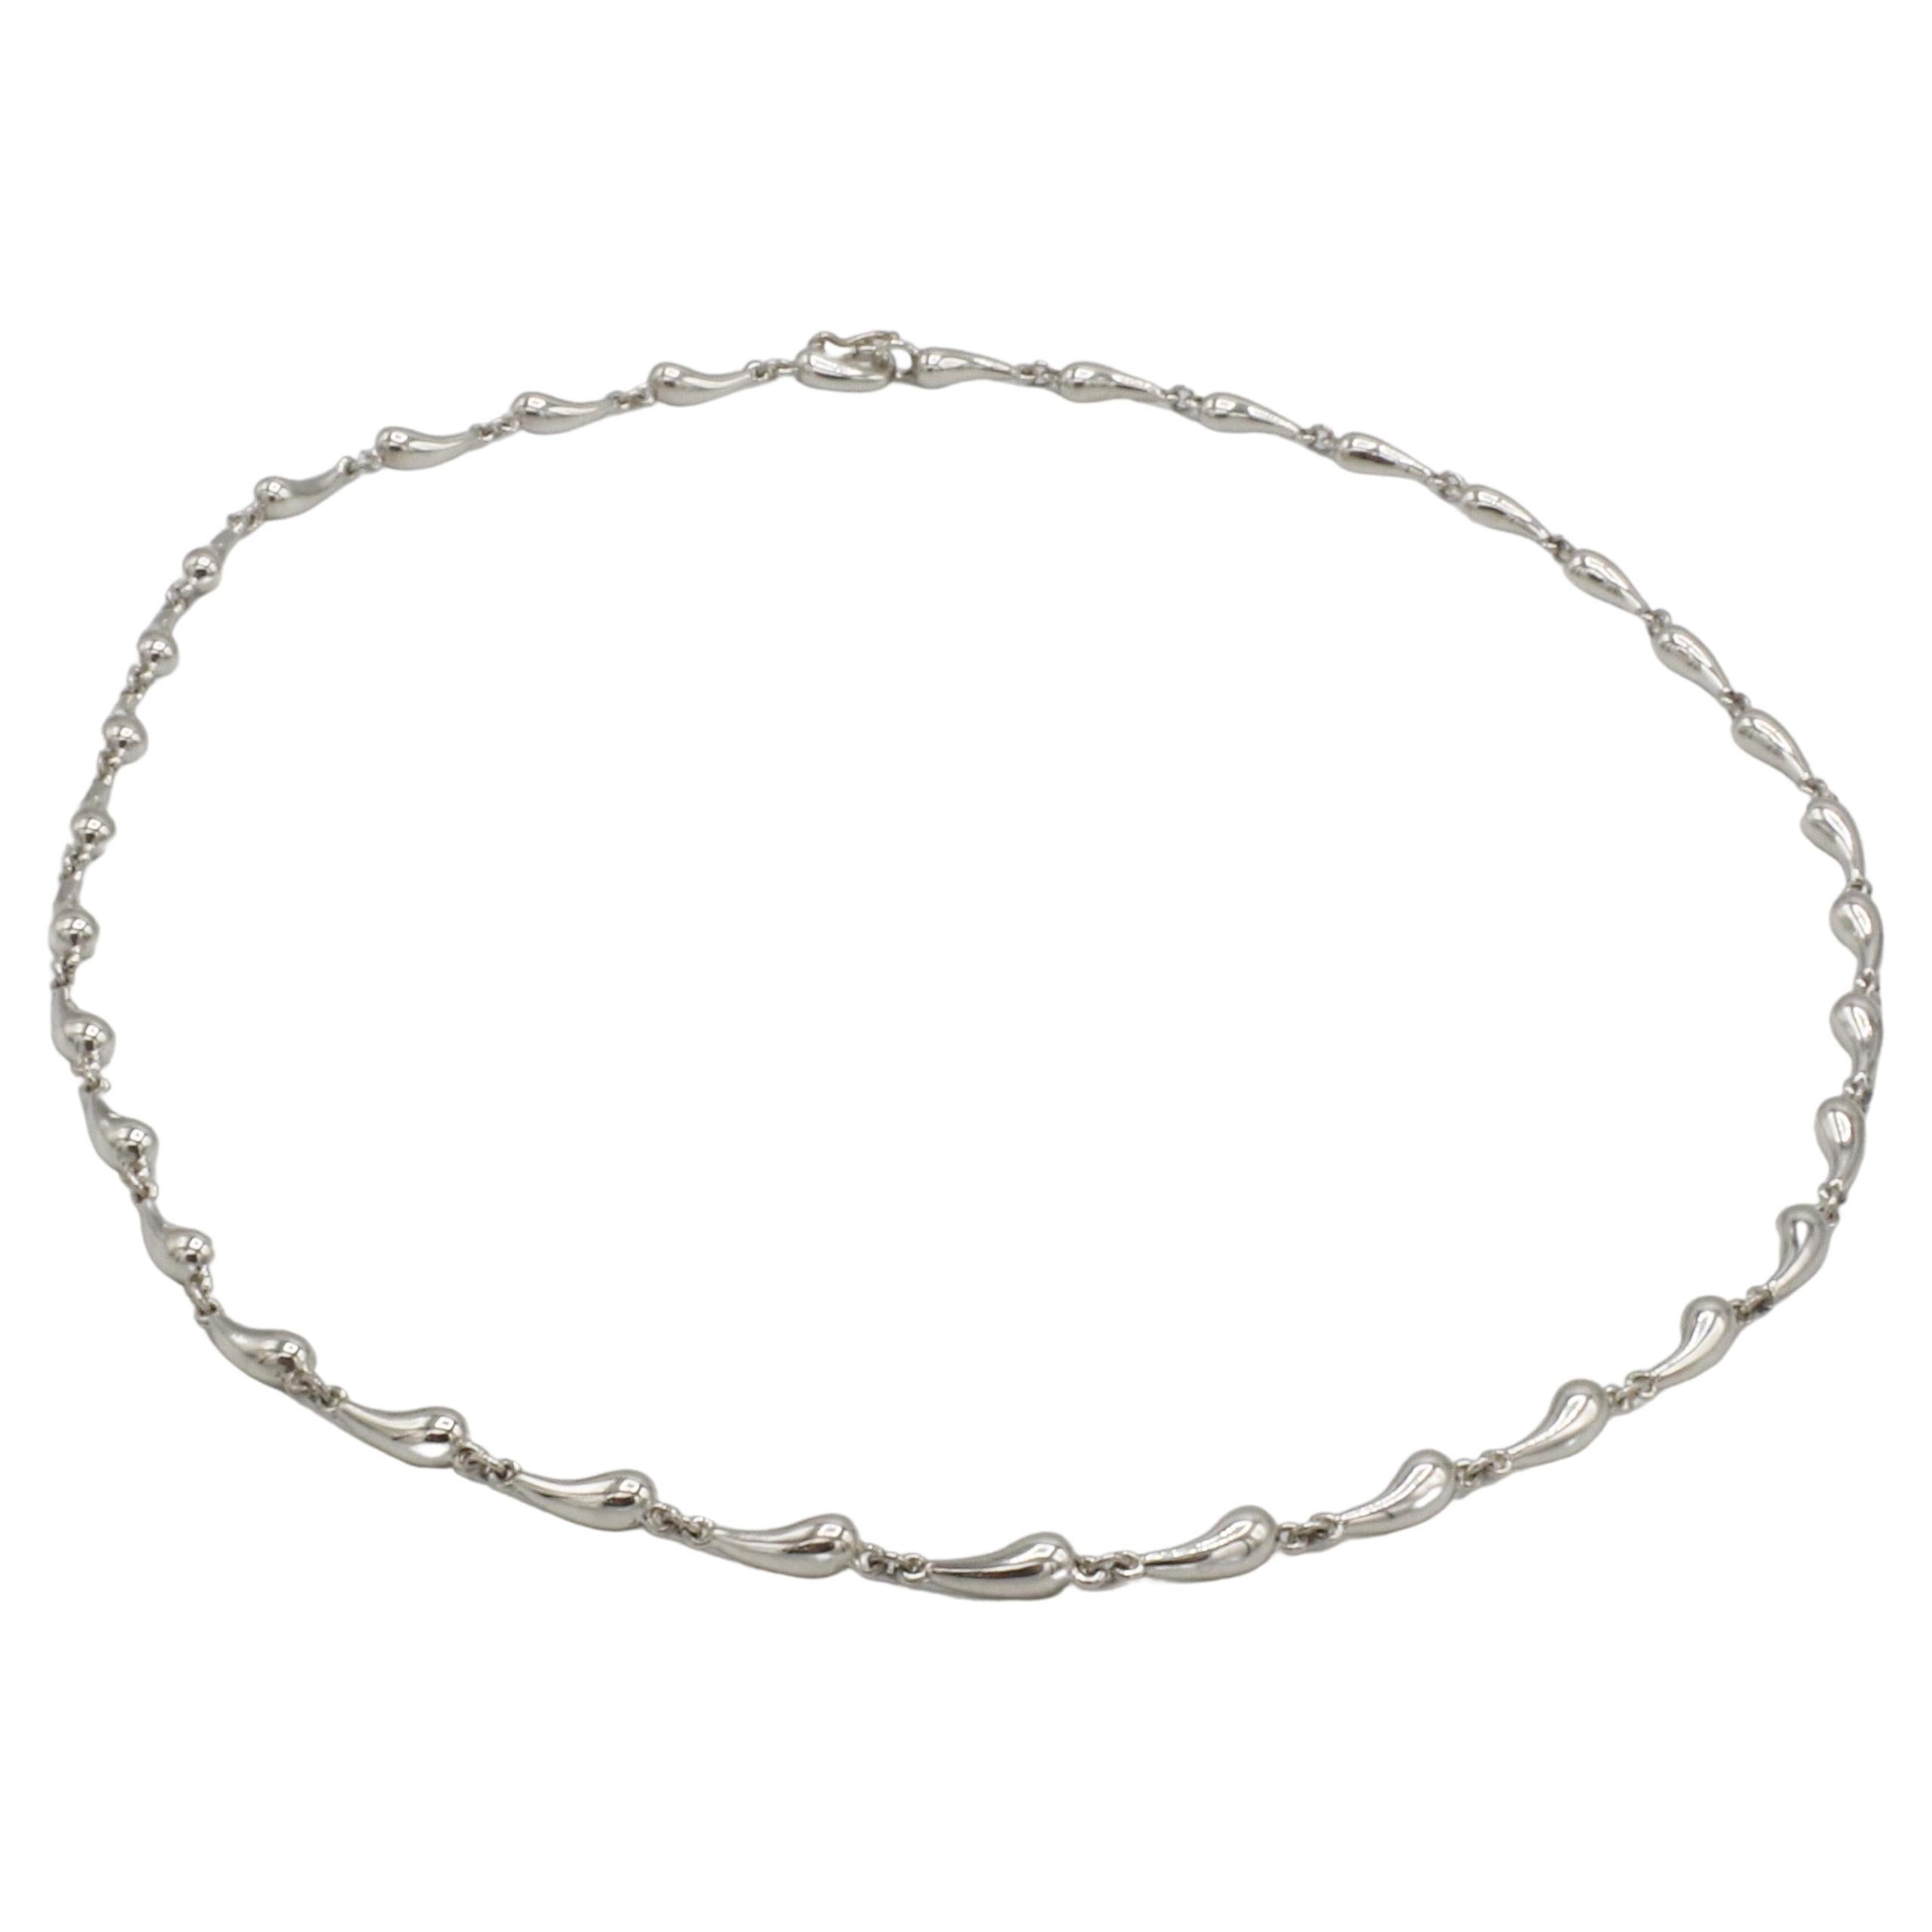 Tiffany & Co. Elsa Peretti Sterling Silver Tear Drop Chain Link Necklace 
Metal: Sterling silver 925
Weight: 16.8 grams
Length: 16 inches
